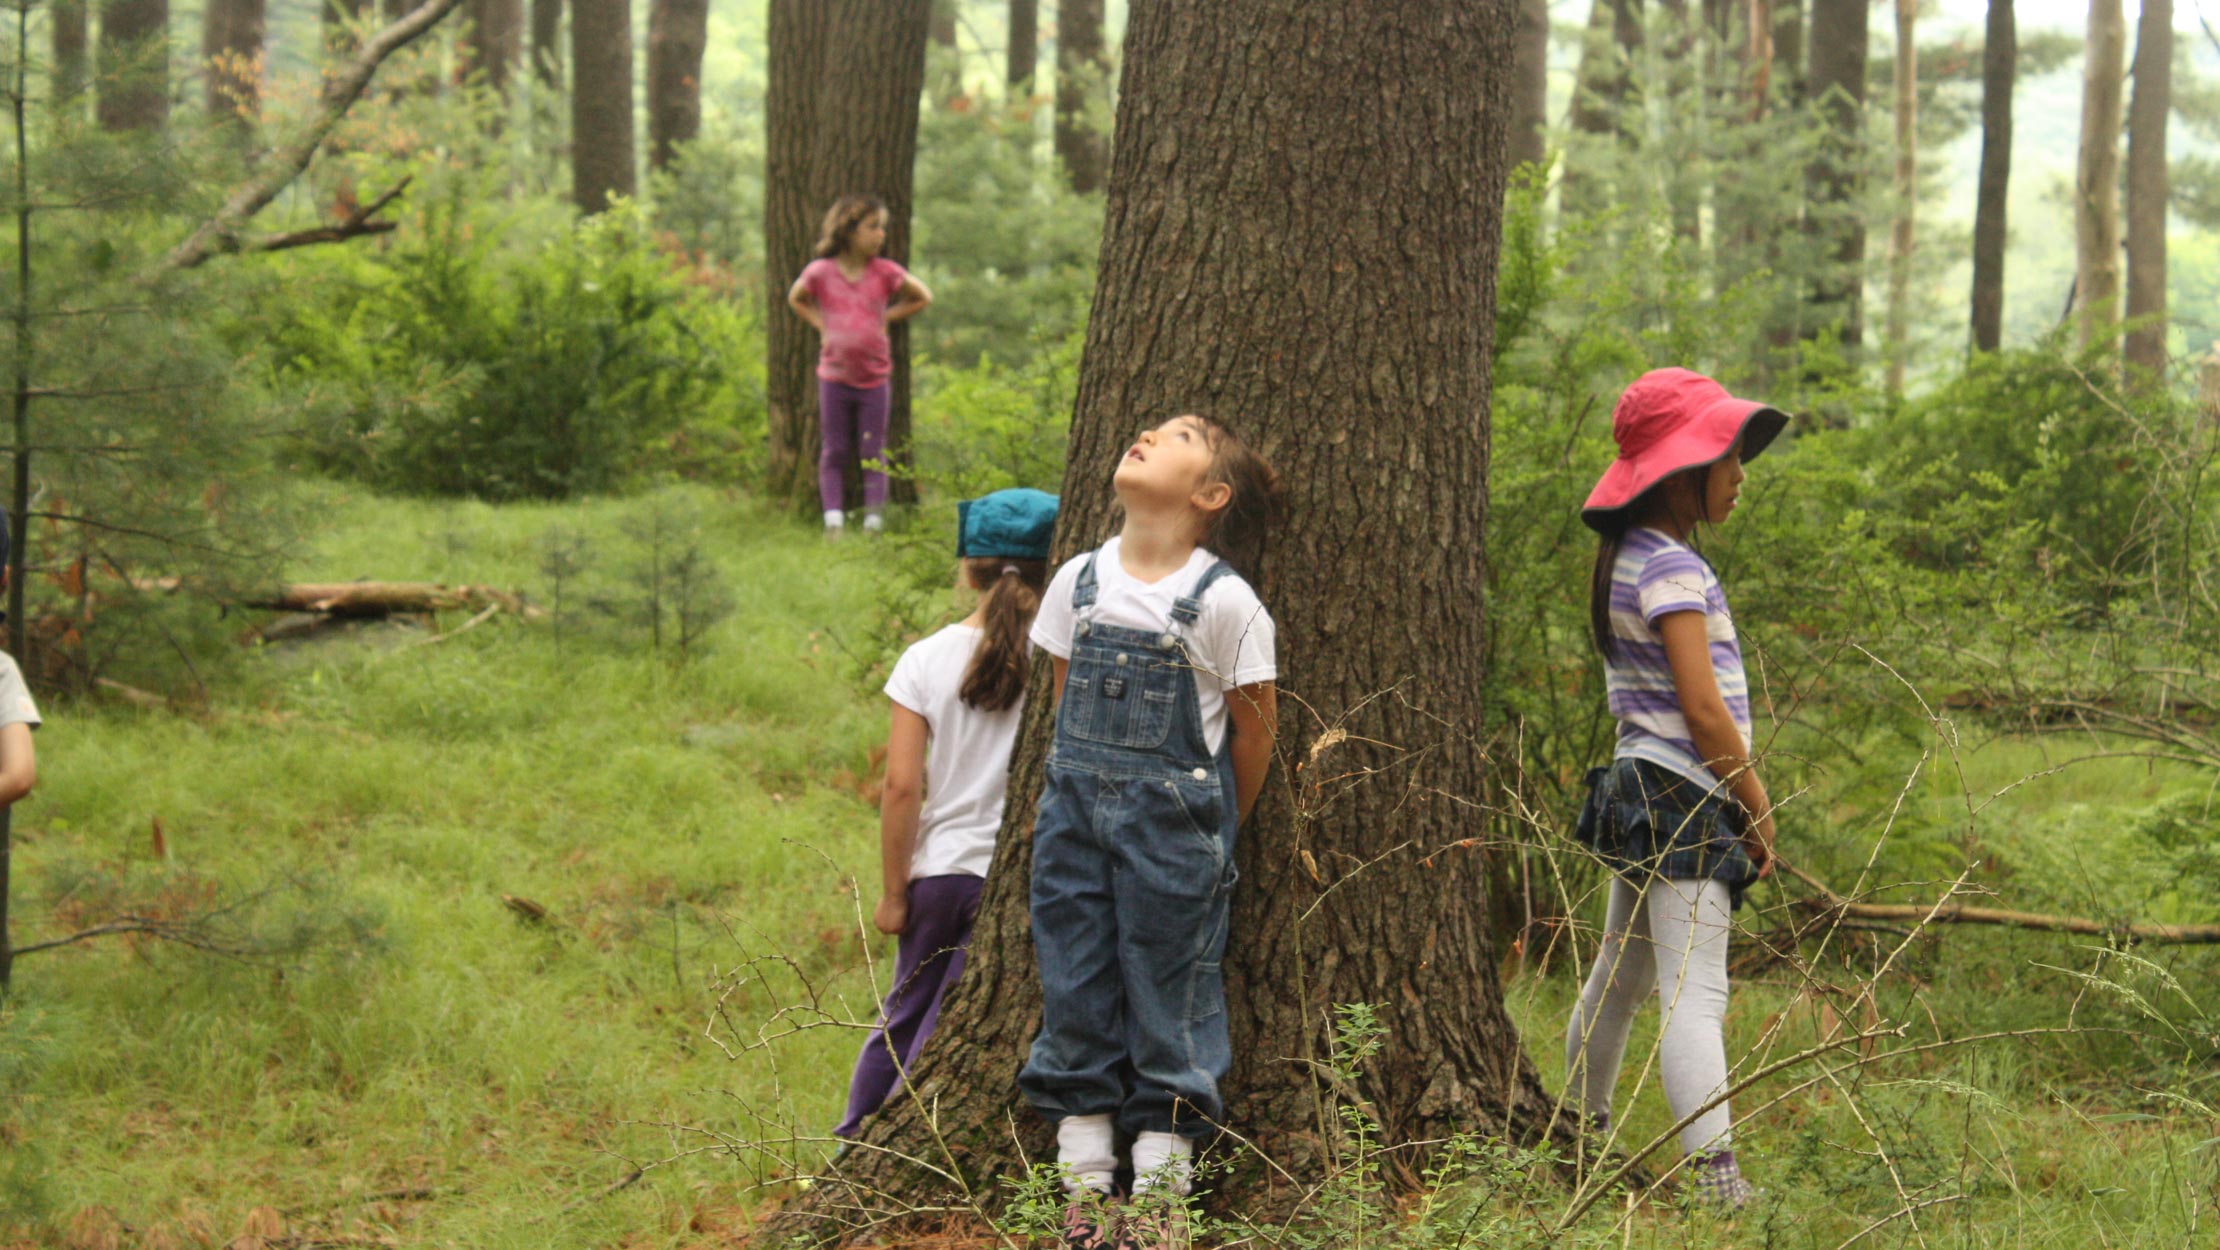 Campers looking up at trees in the forest